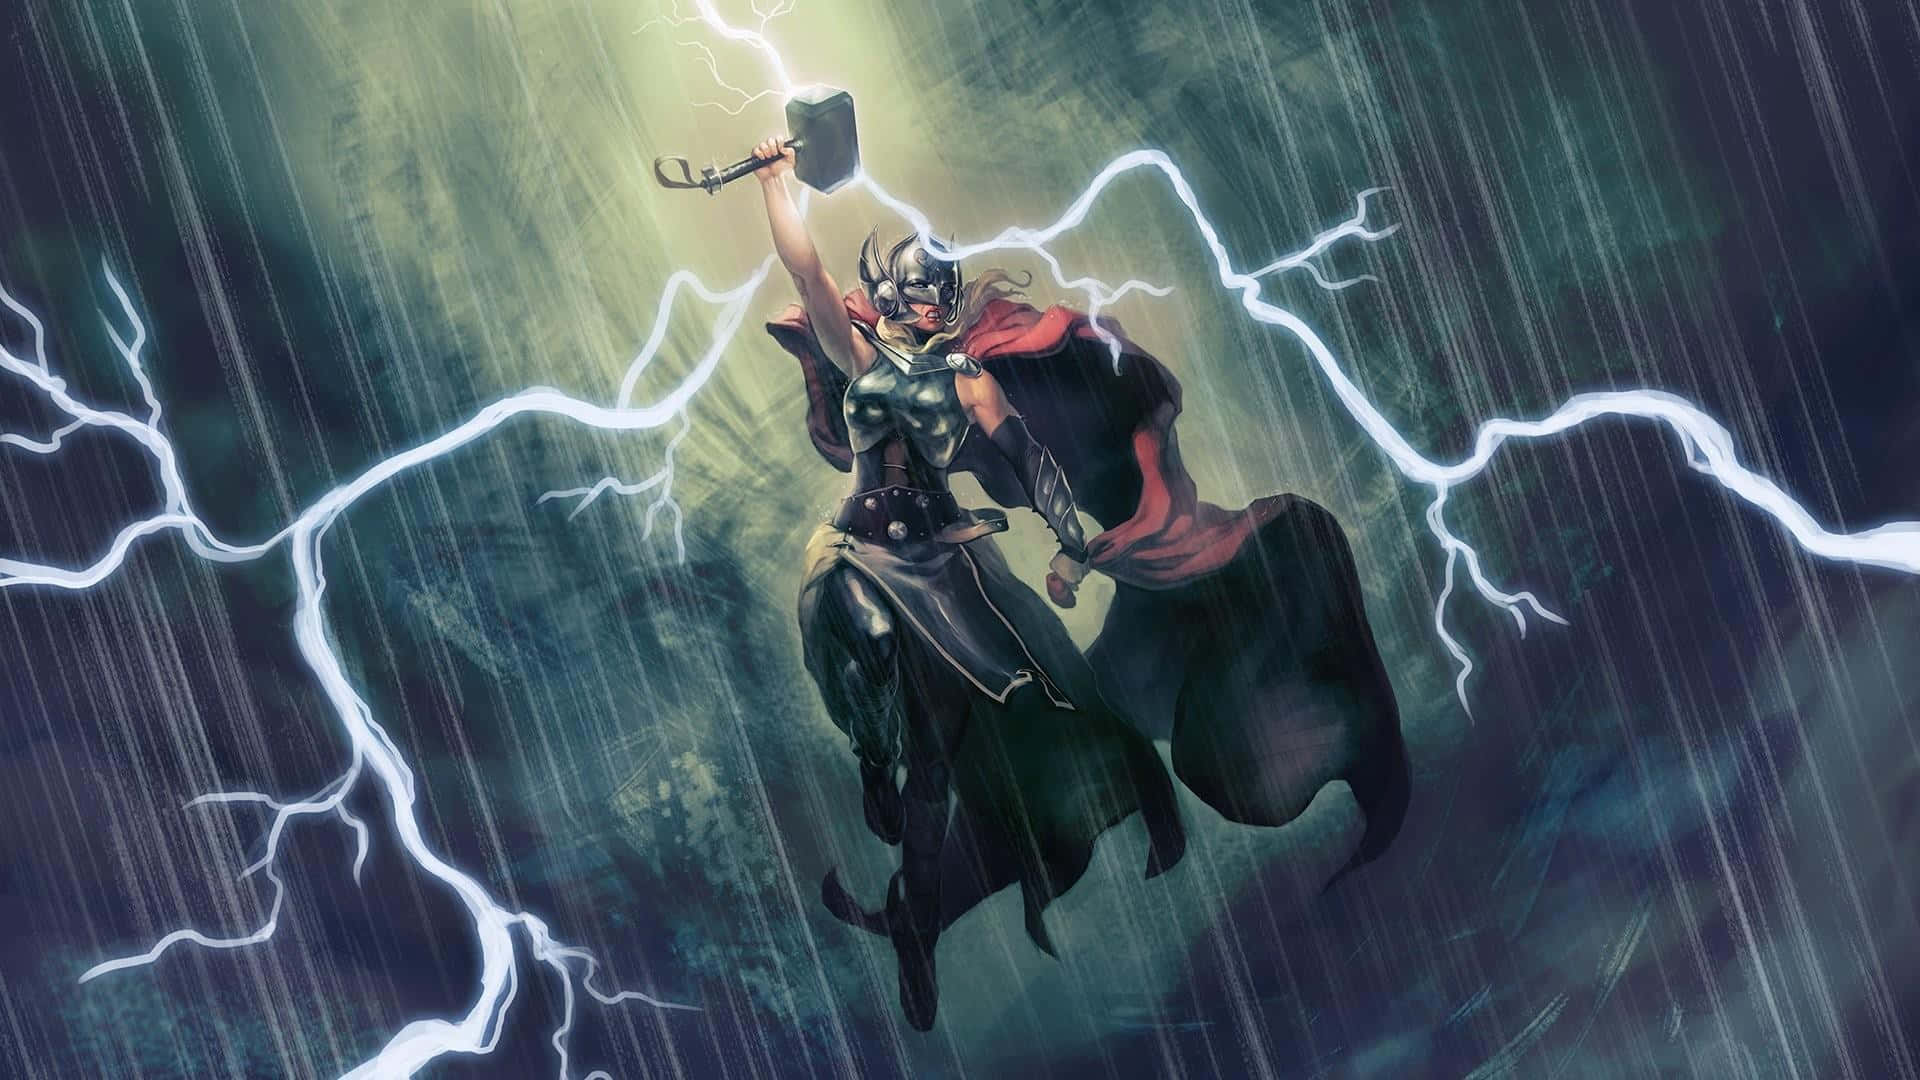 Jane Foster - The Mighty Thor Wallpaper